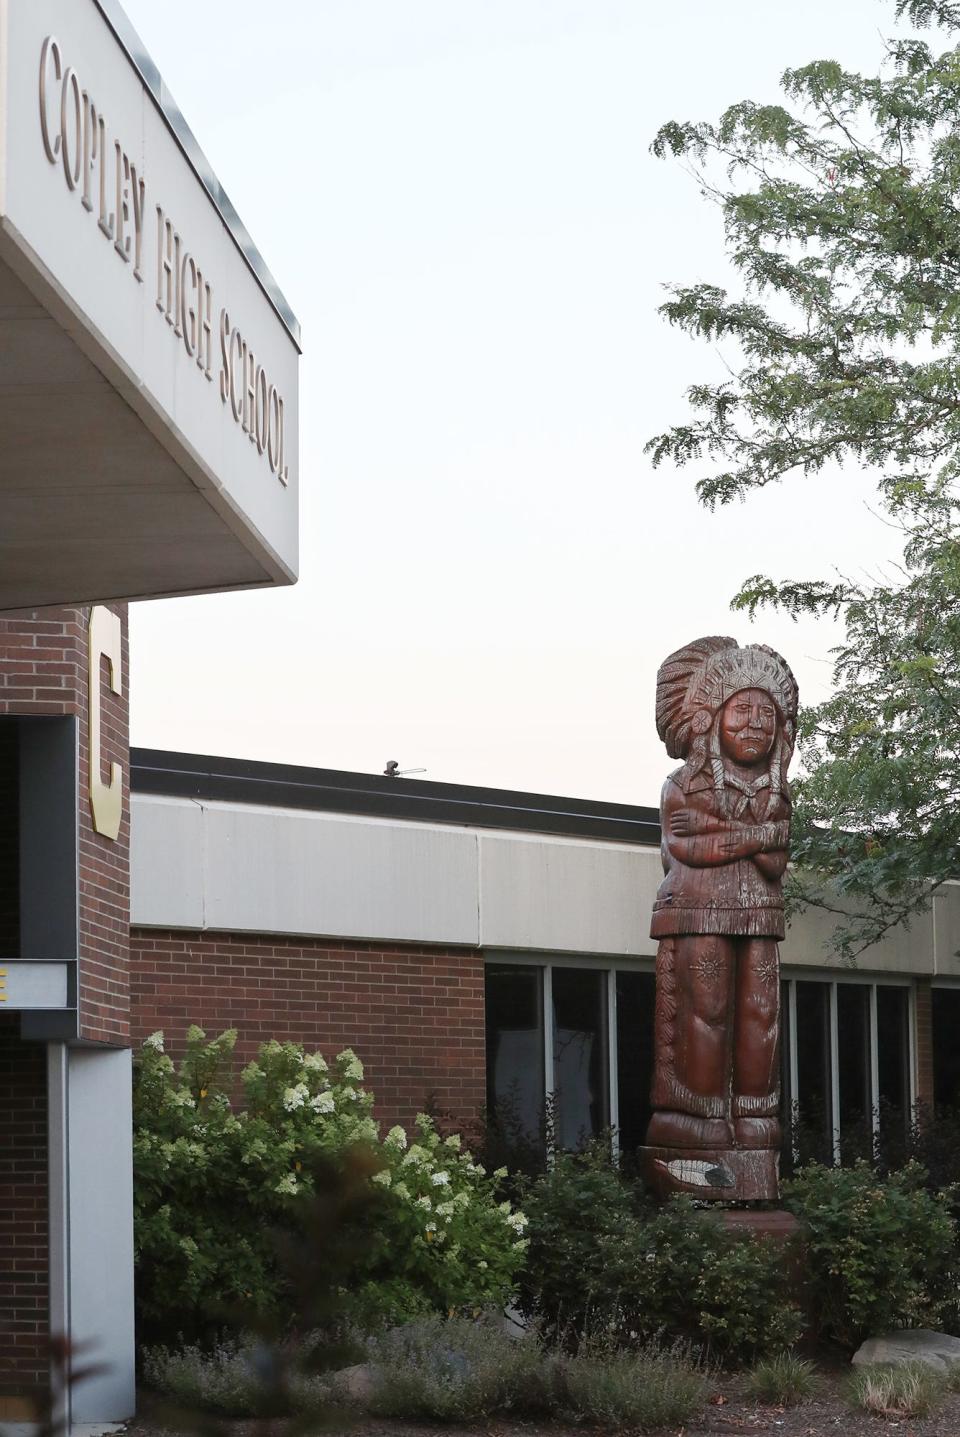 A wooden carved statue stands near the entrance of Copley High School.